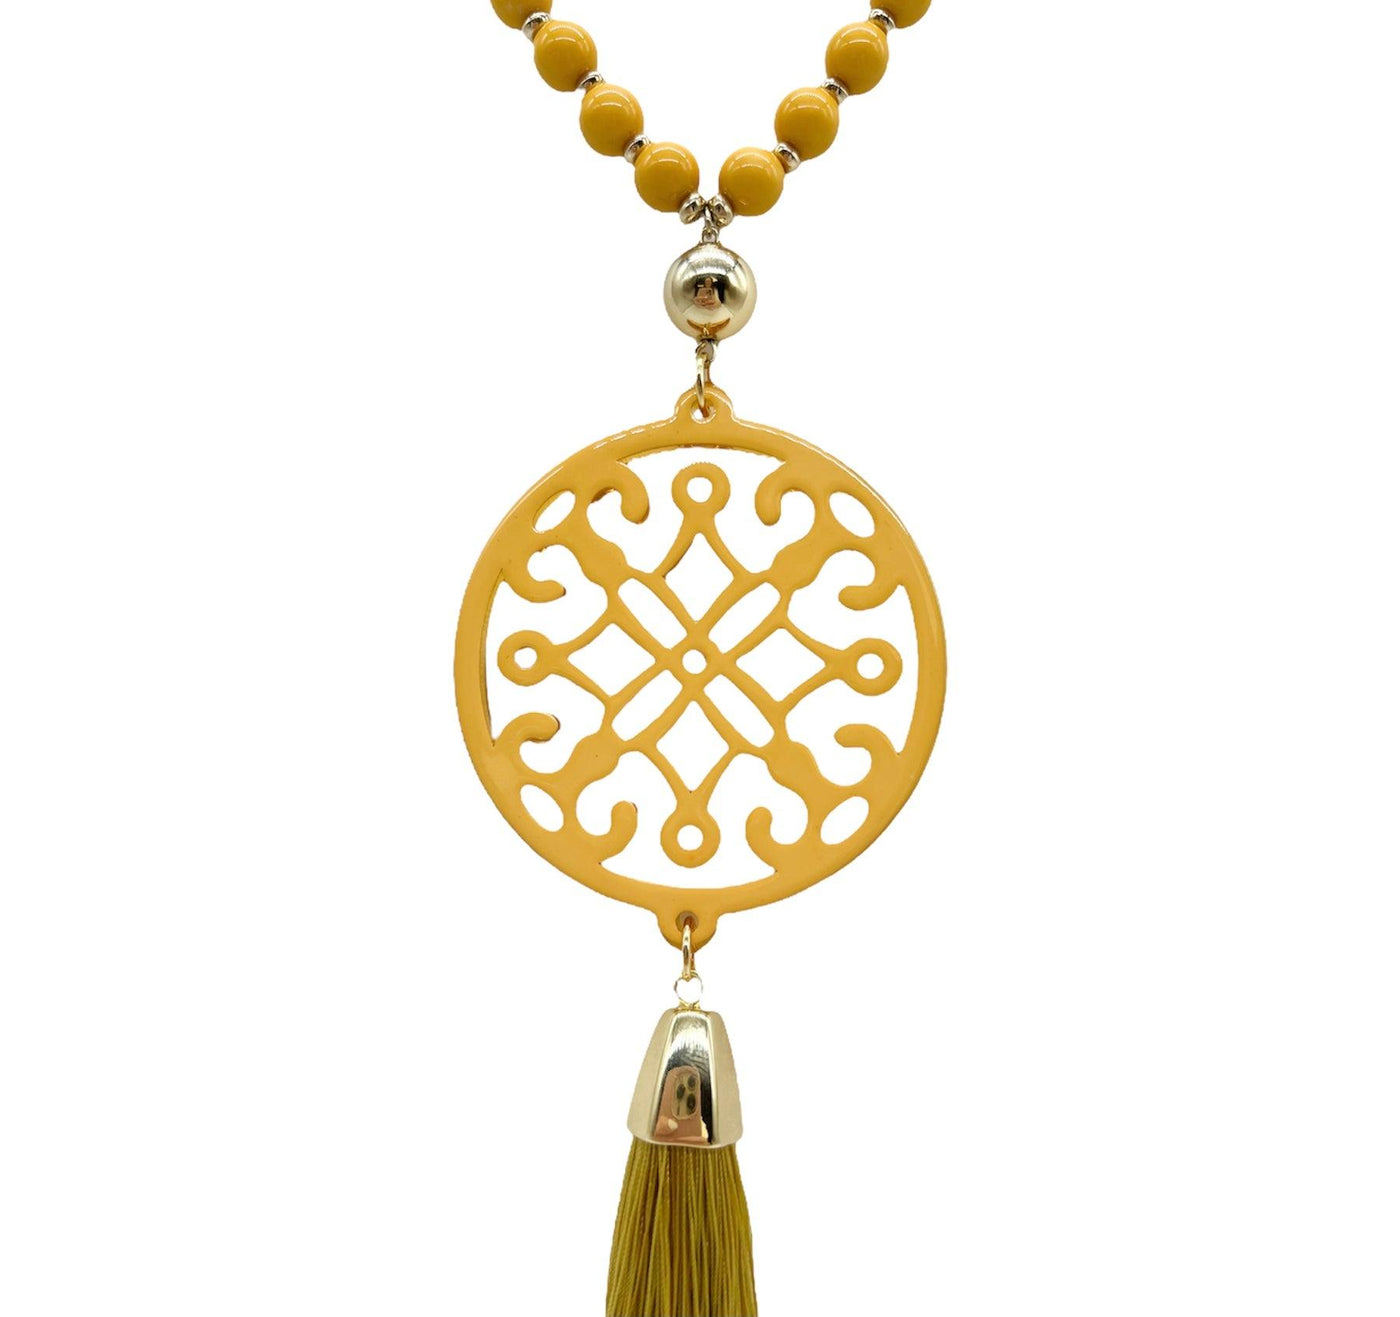 Honey yellow ornate resin pendant on a beaded chain with a tassel